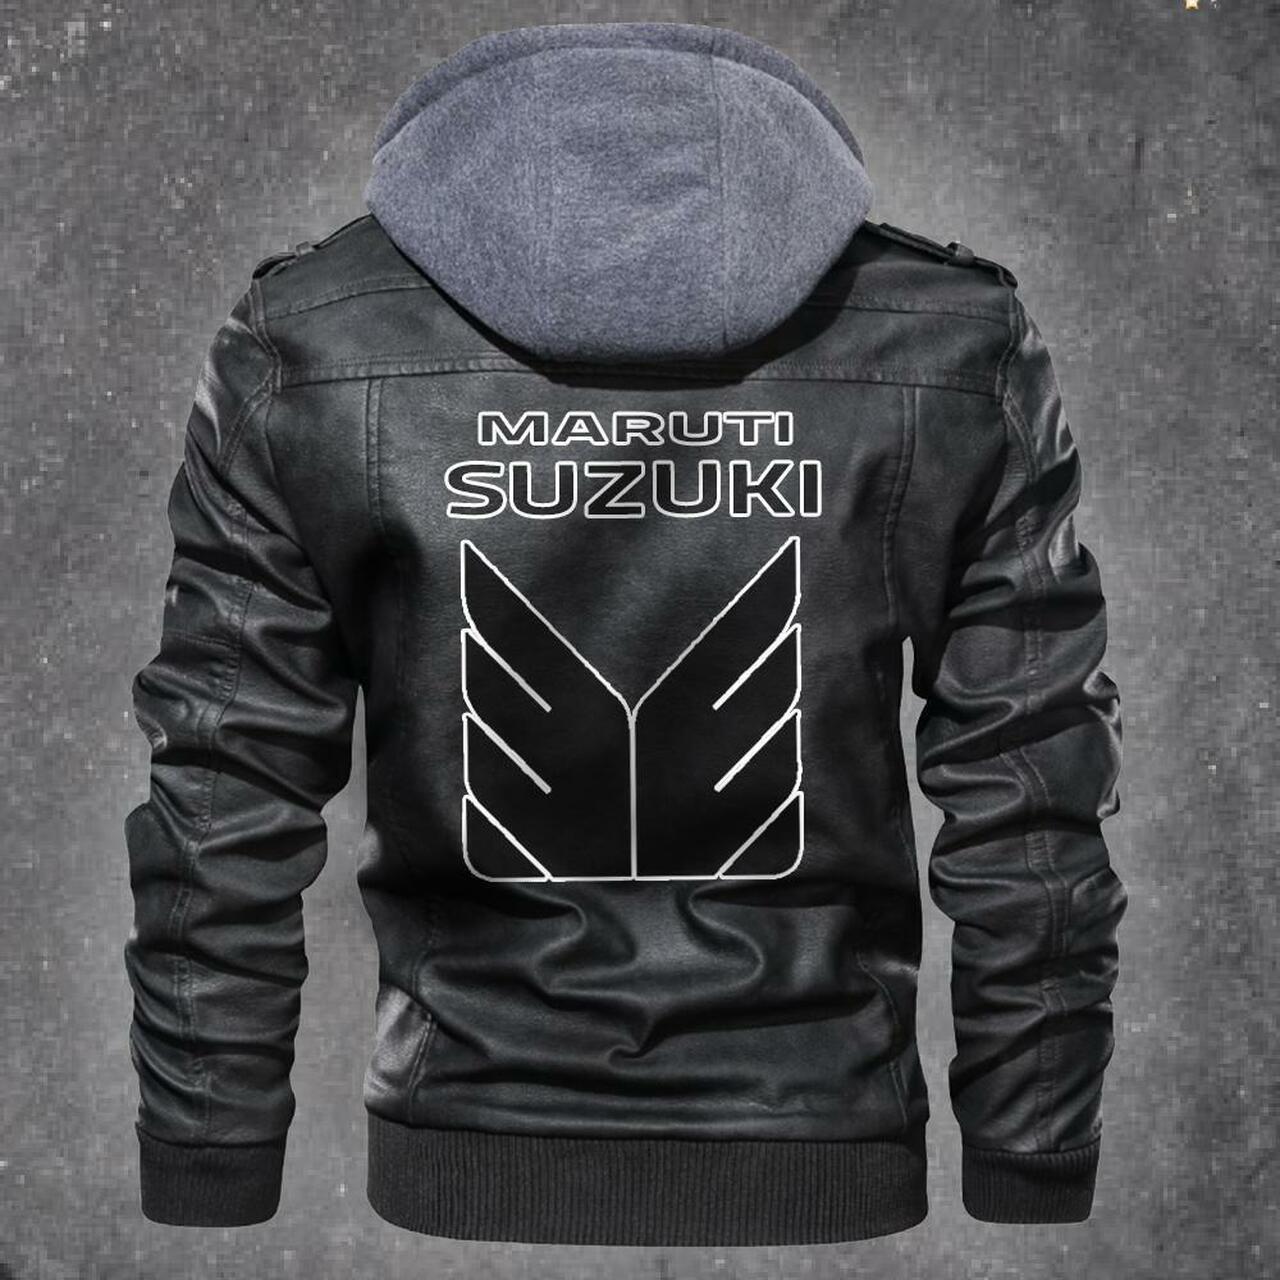 Check out and find the right leather jacket below 525